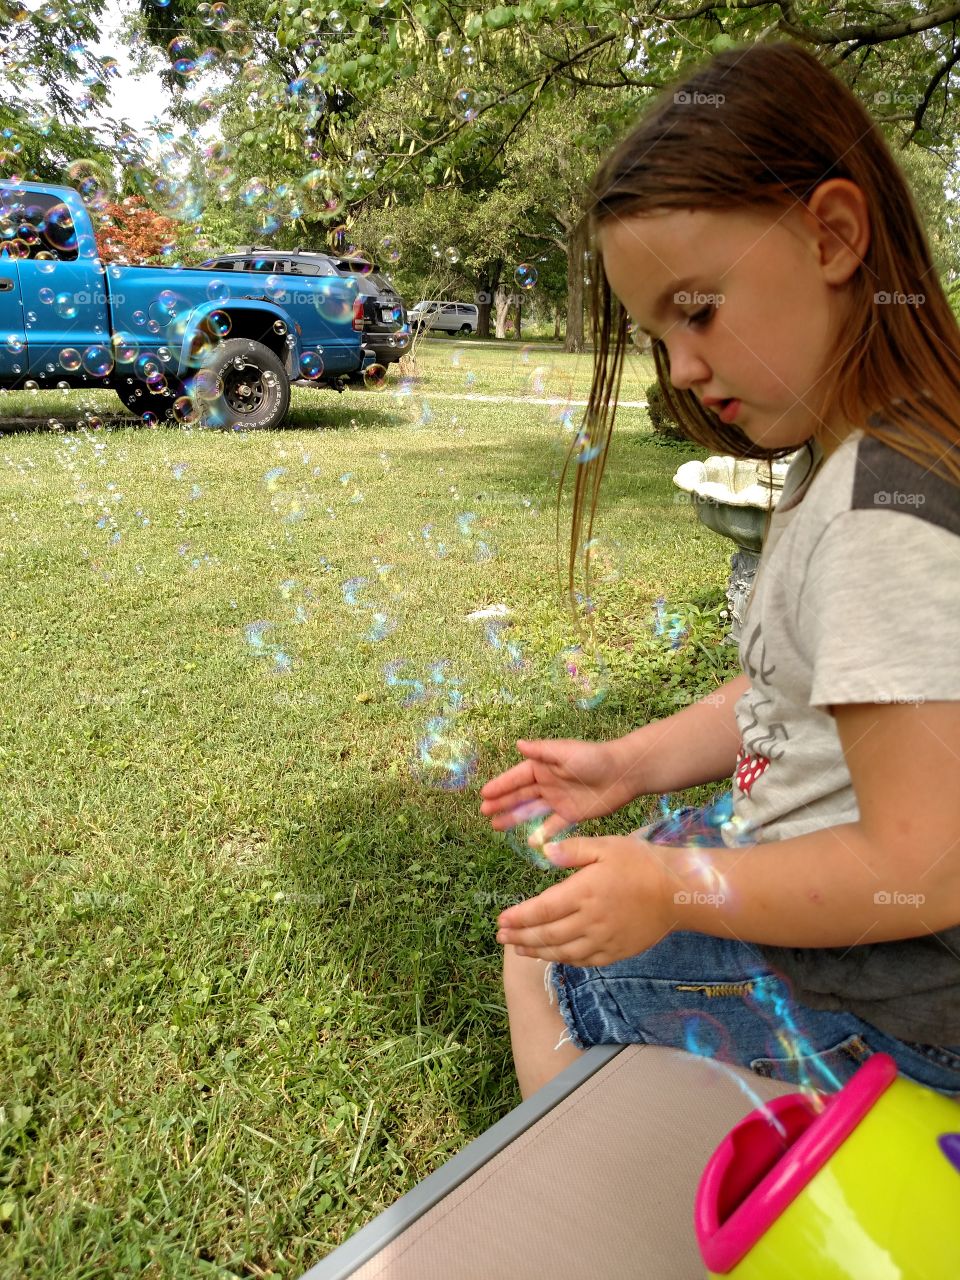 Catching Bubbles